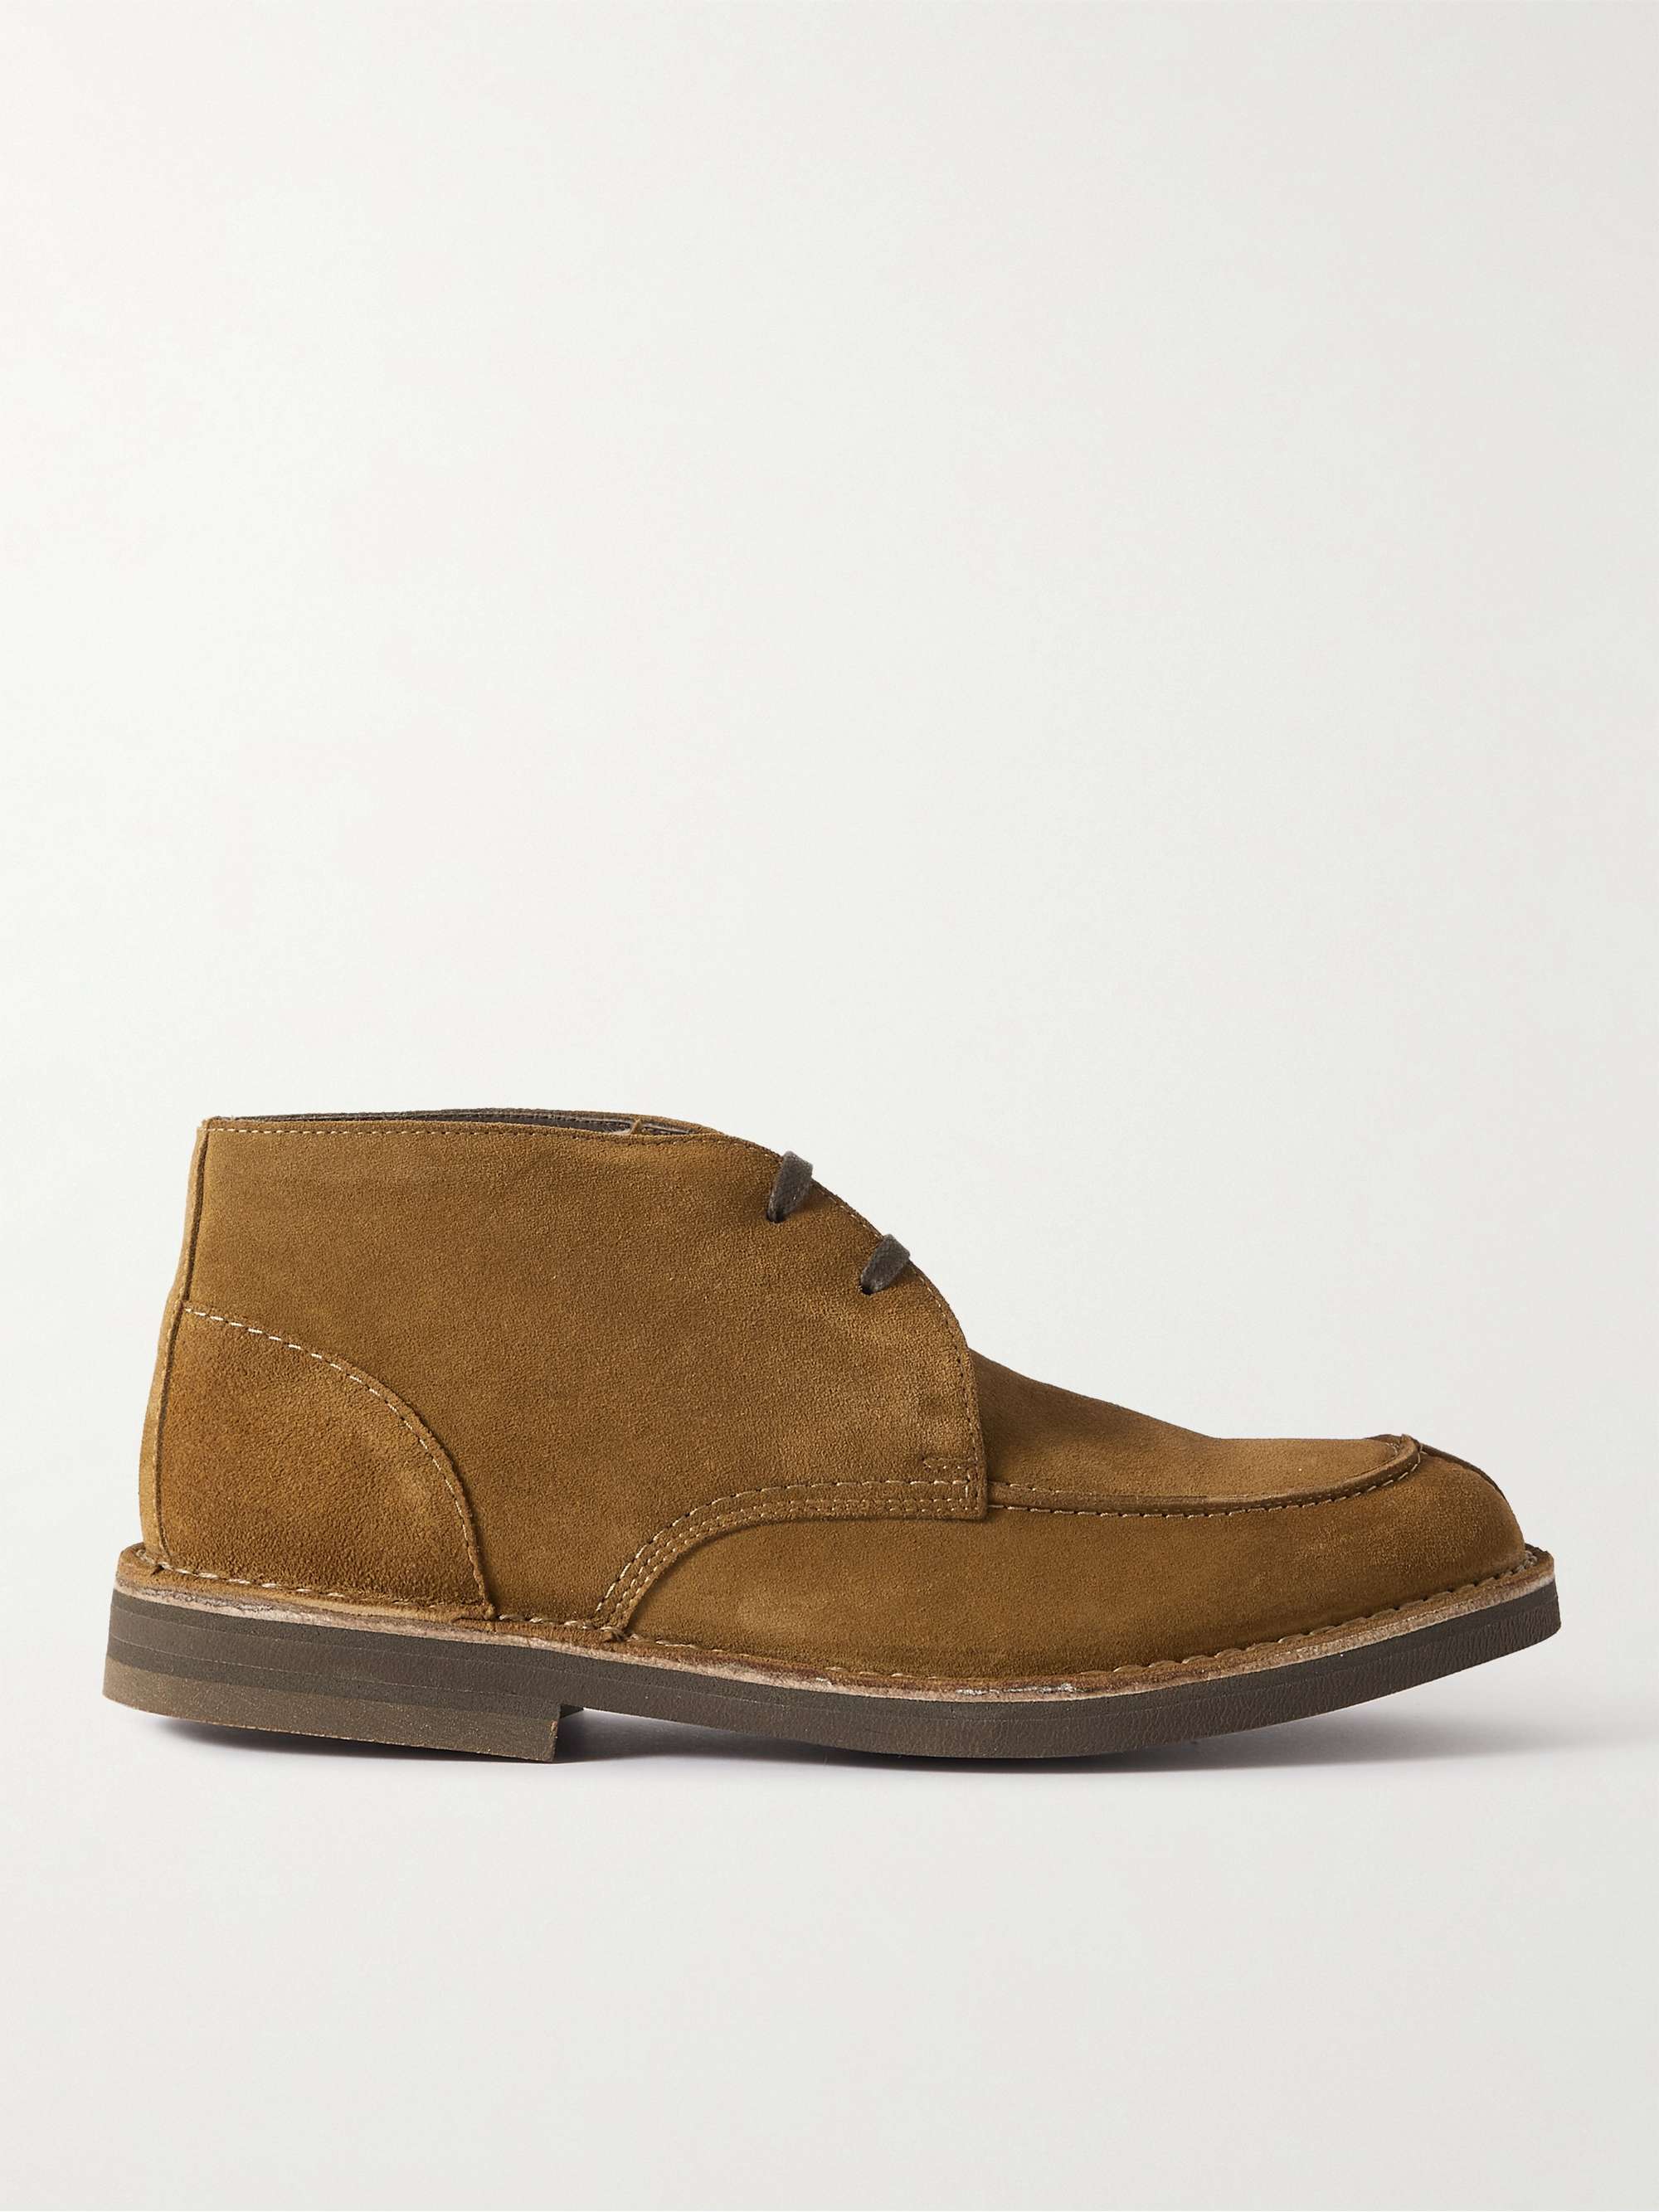 MR P. Andrew Split-Toe Regenerated Suede by evolo® Chukka Boots